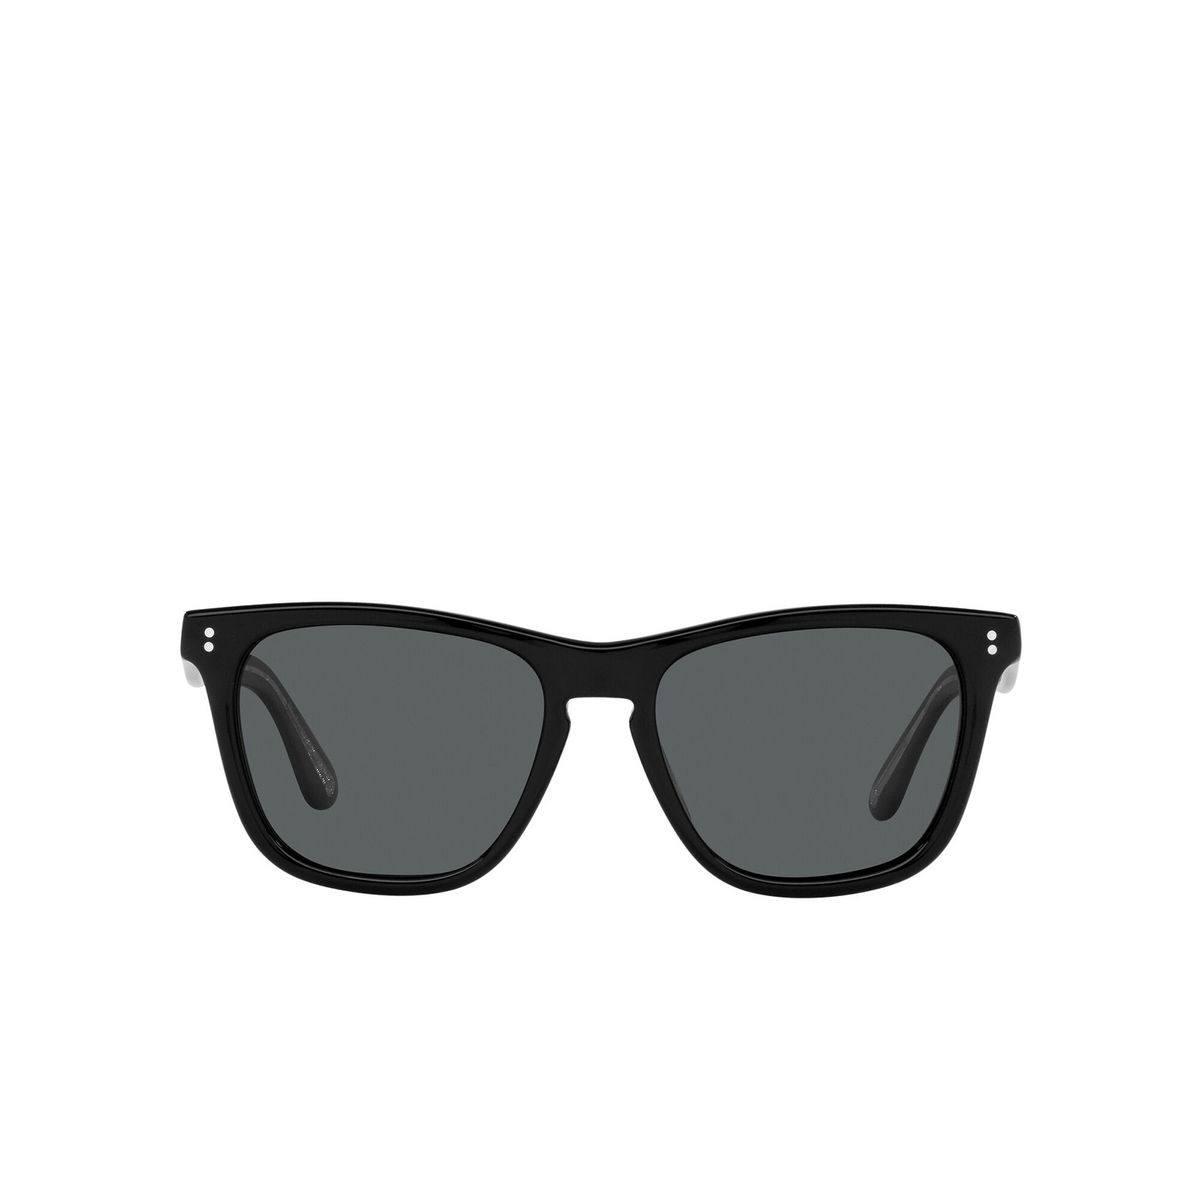 Oliver Peoples LYNES Sunglasses 1005P2 Black - front view